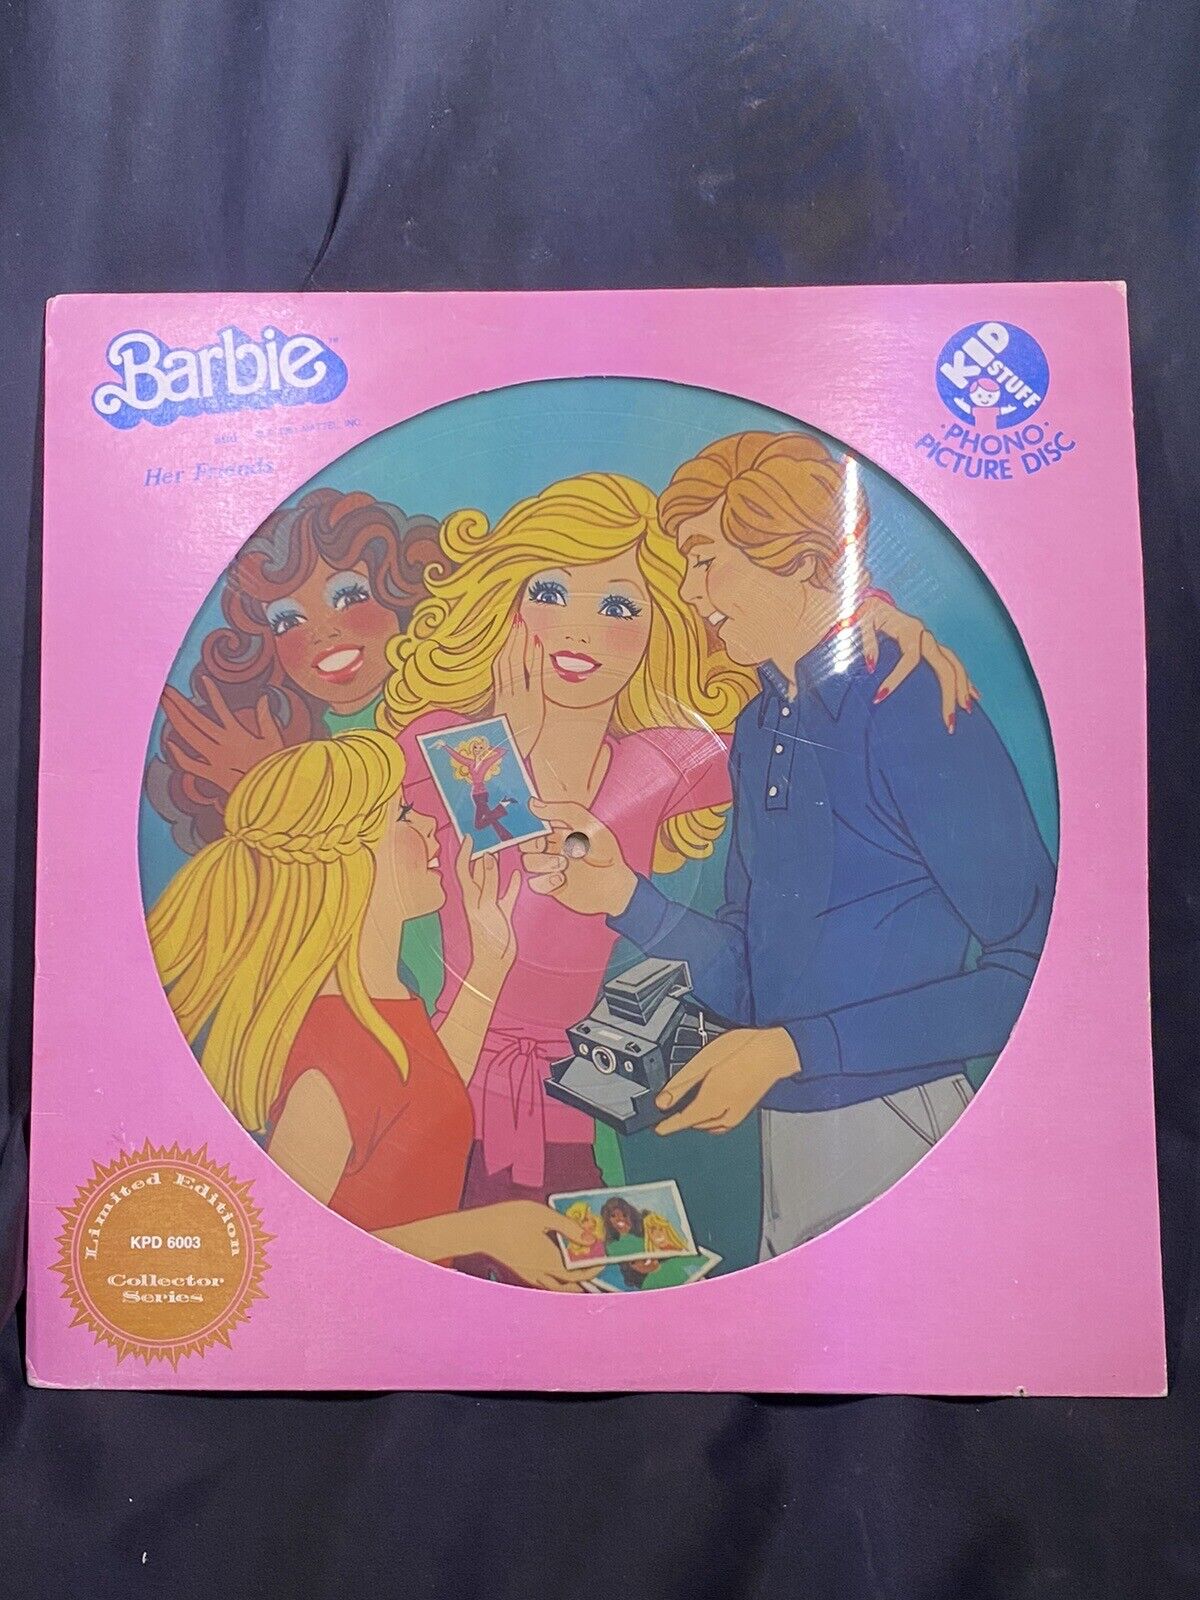 VINTAGE 1981 LIMITED EDITION BARBIE & HER FRIENDS PICTURE DISC RECORD KDP-6003